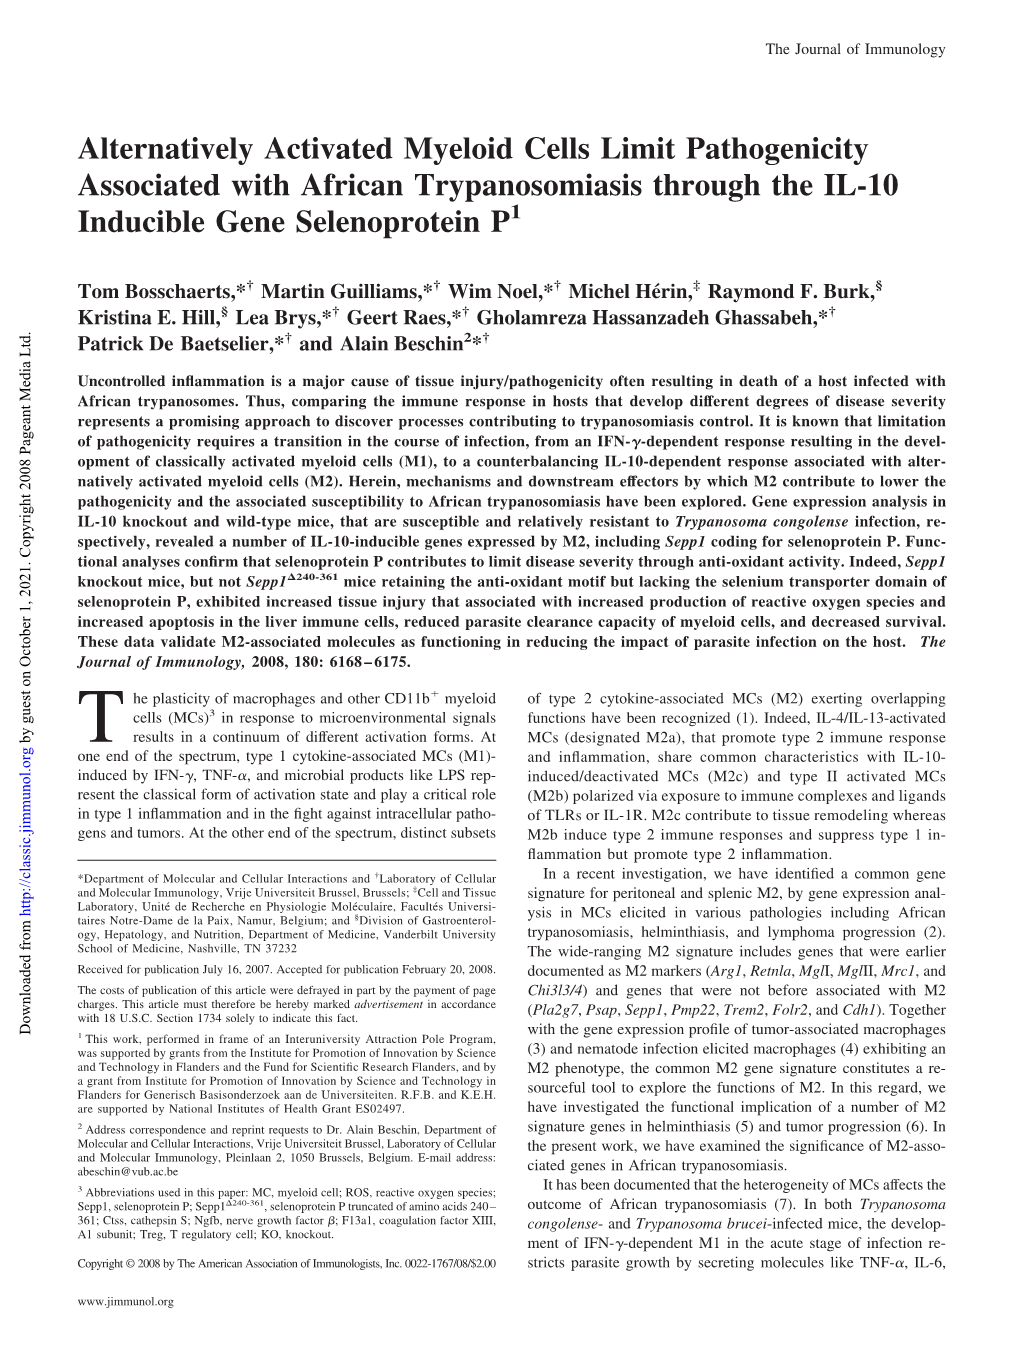 Gene Selenoprotein P Trypanosomiasis Through the IL-10 Inducible Pathogenicity Associated with African Alternatively Activated M